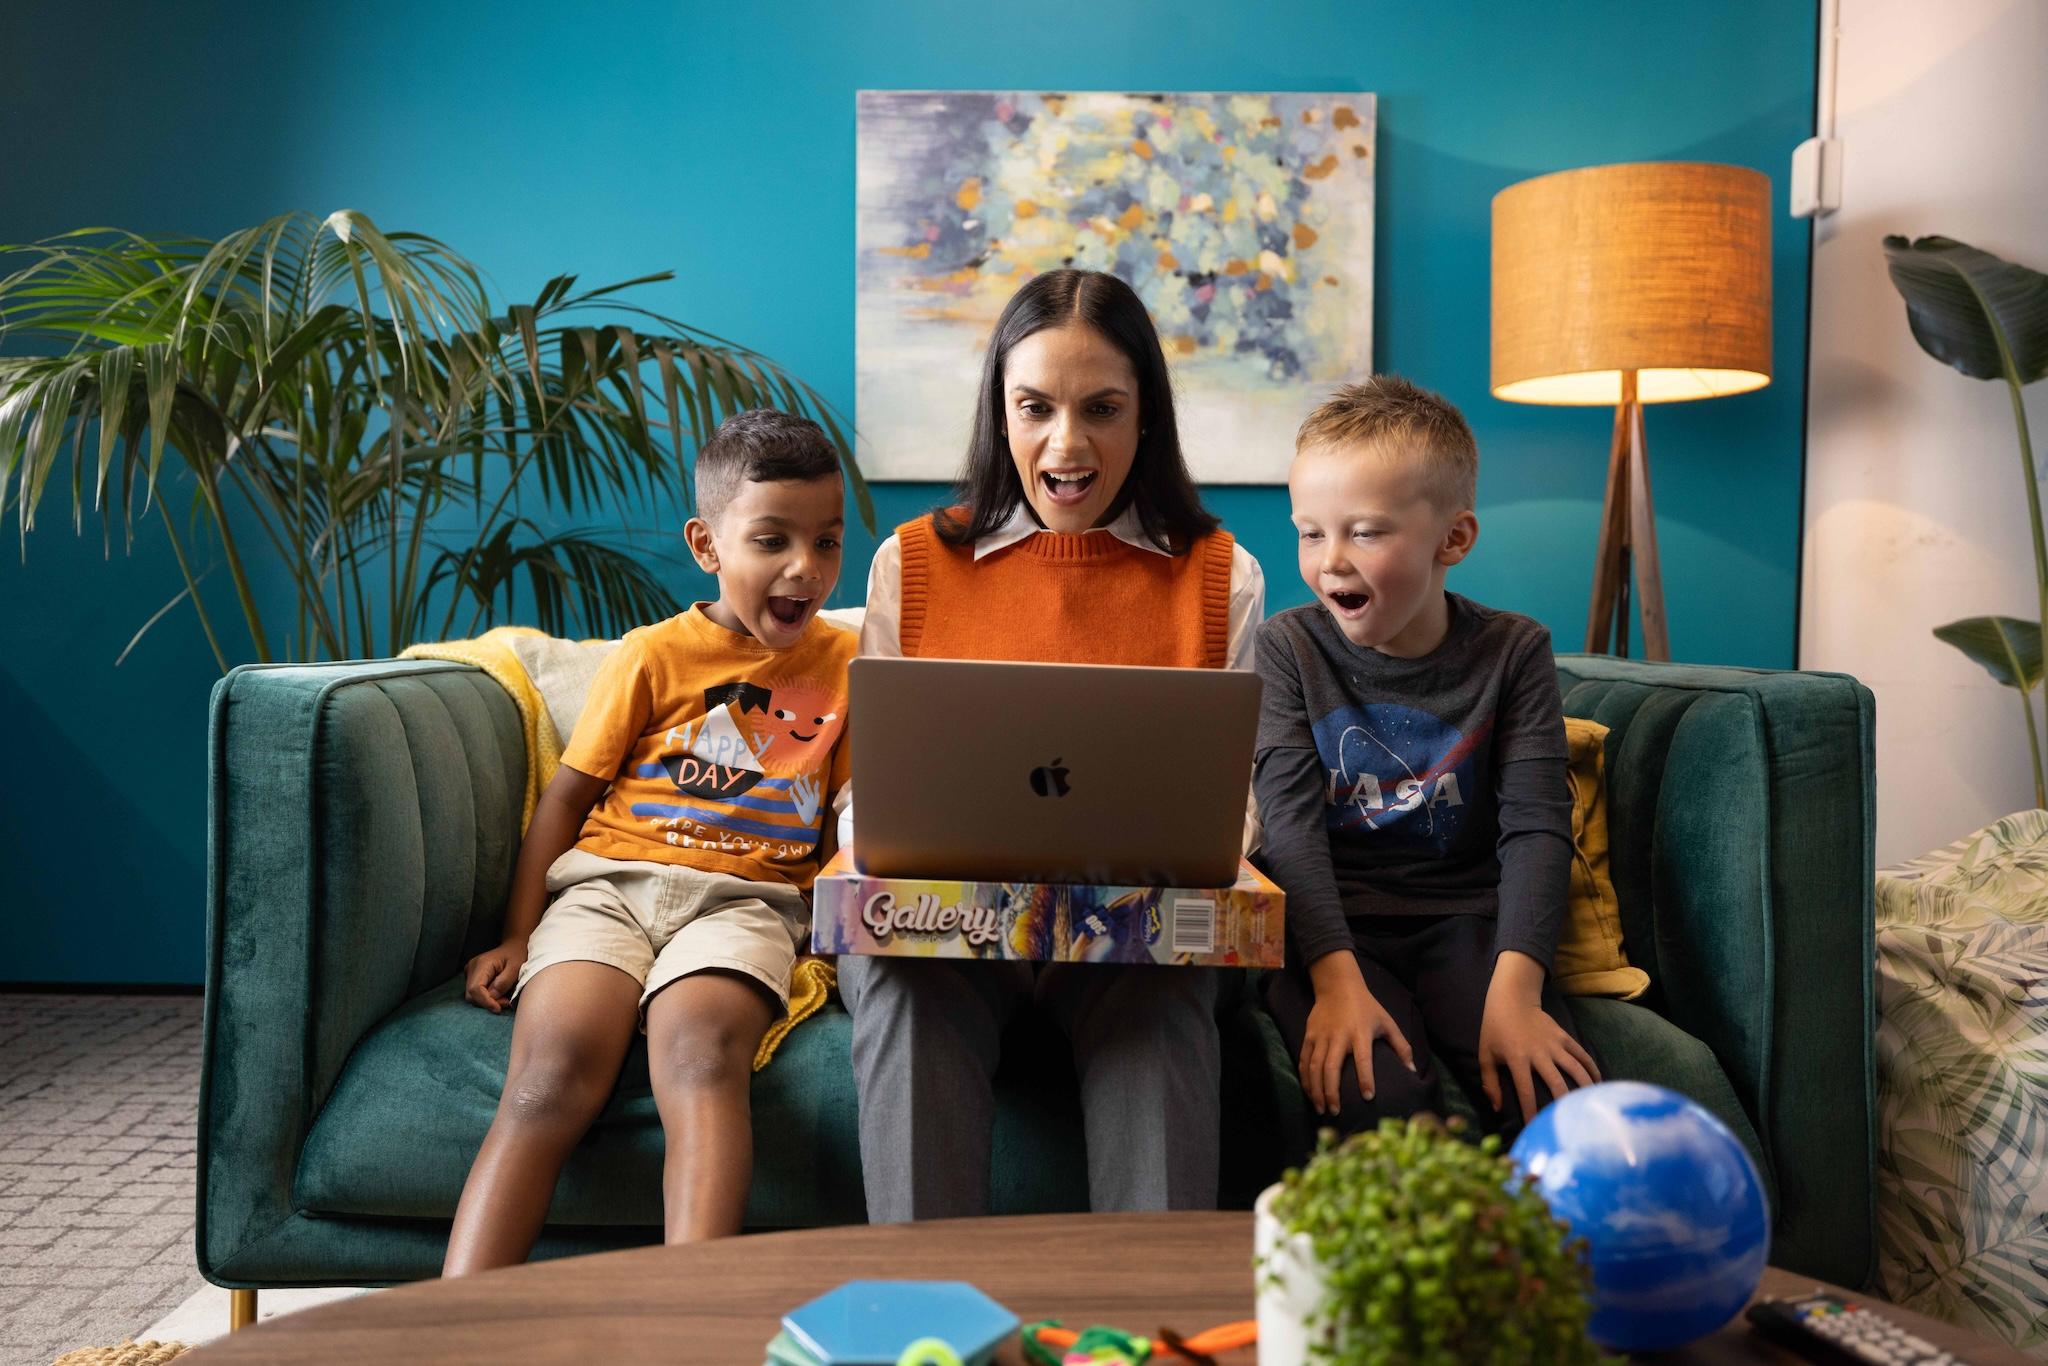 A woman and two boys smile in excitement while looking at a laptop on a teal sofa, surrounded by educational toys.